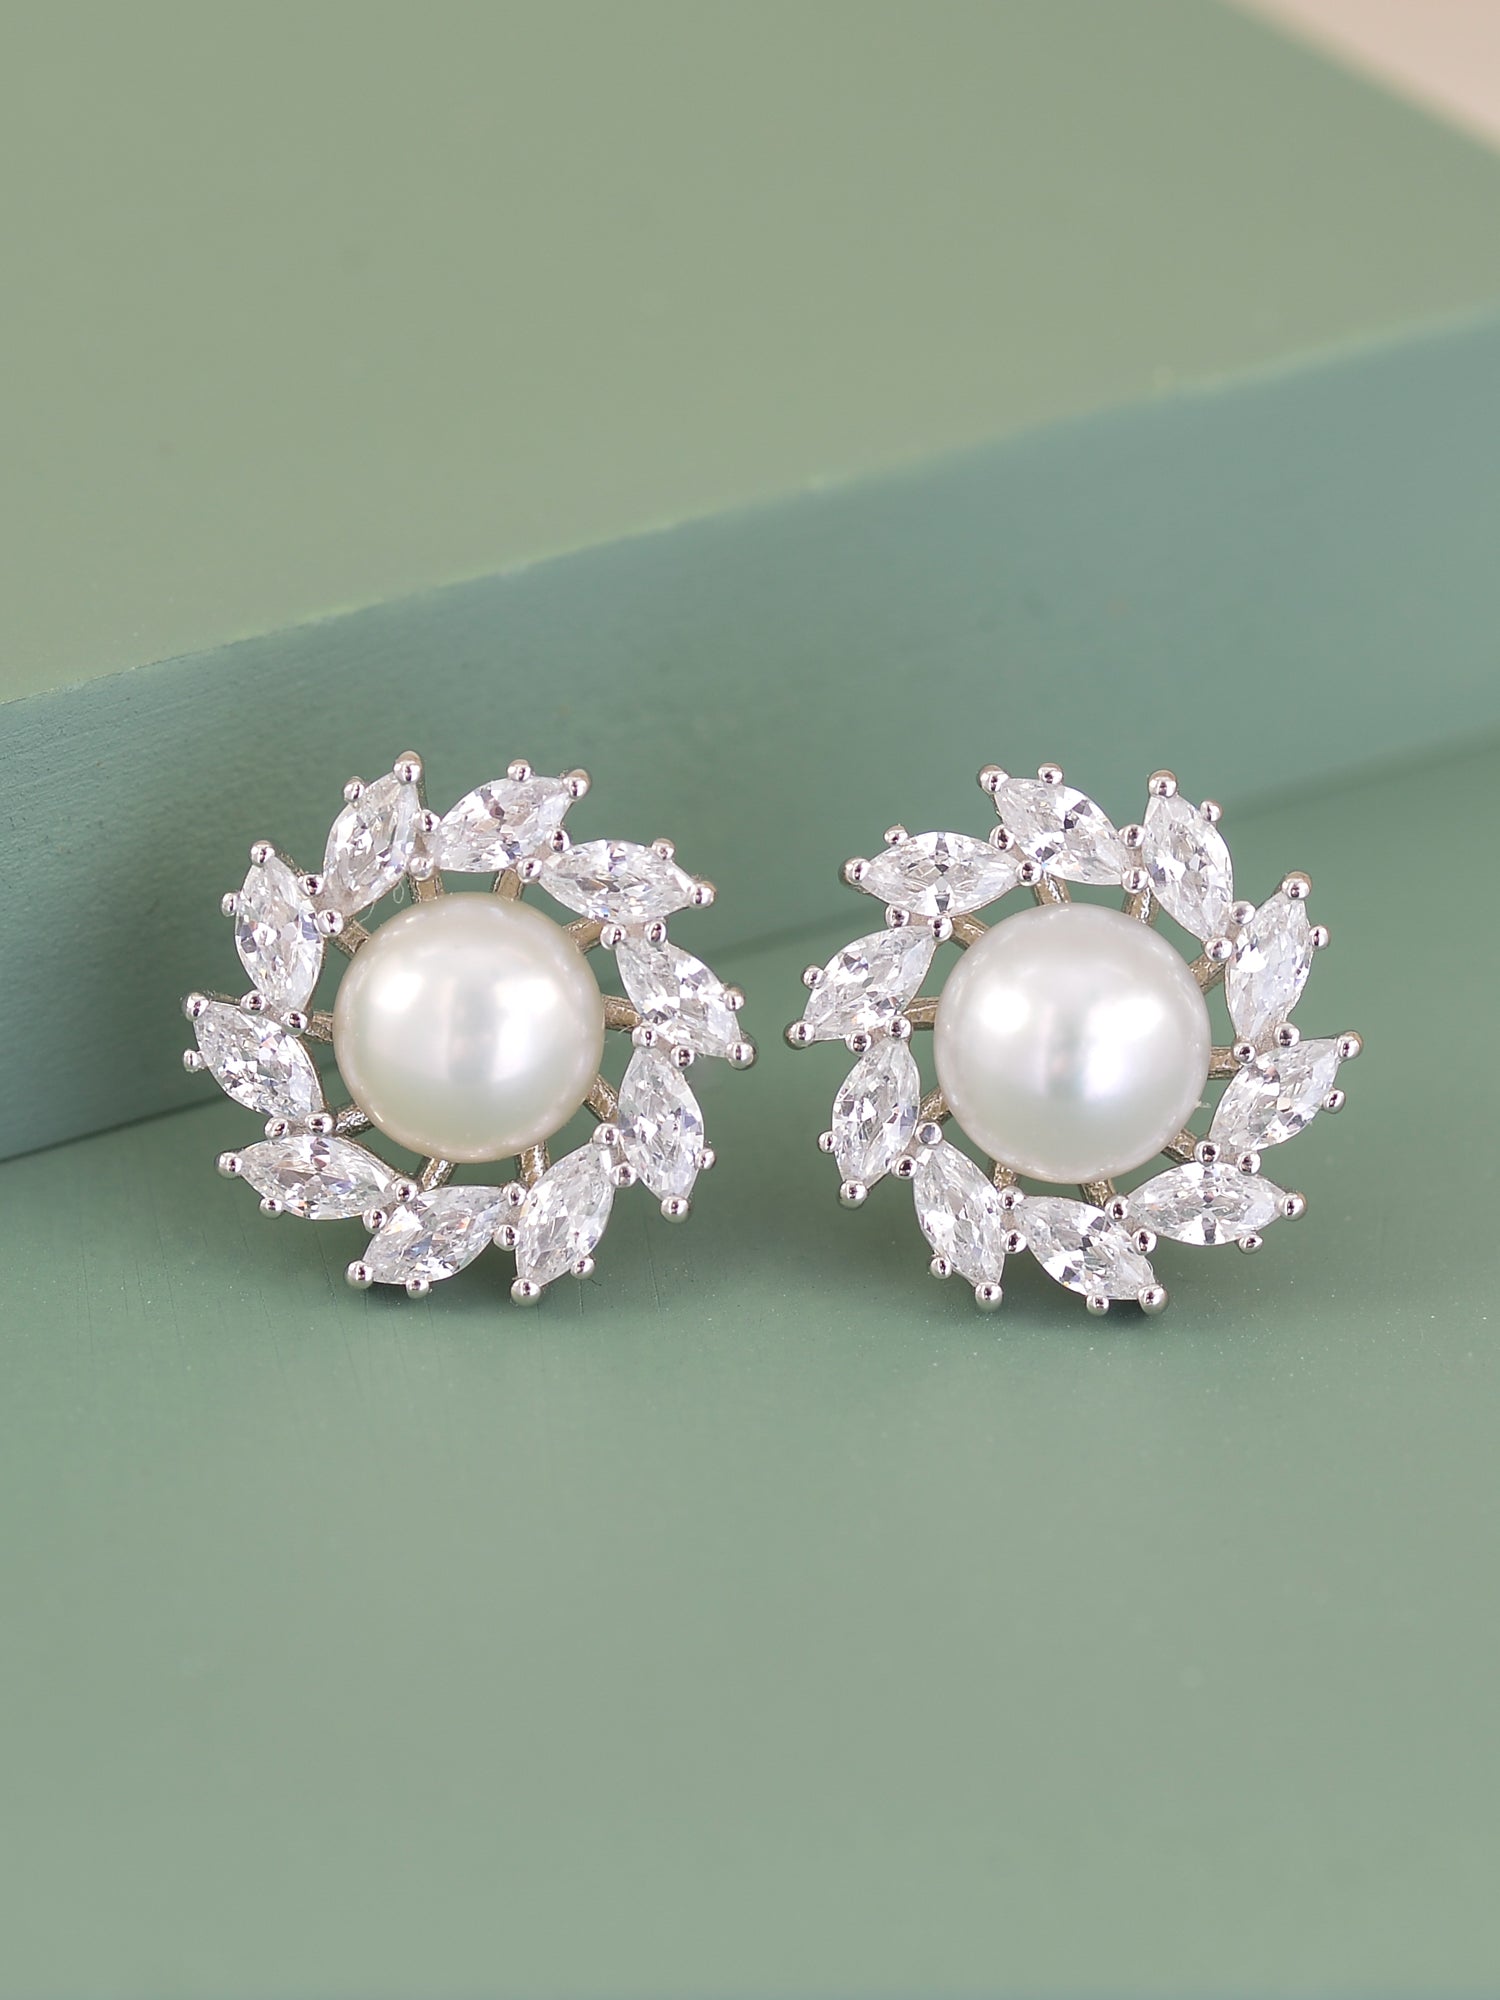 NATURAL FRESHWATER PEARL AND DIAMOND HALO EARRINGS IN 925 SILVER